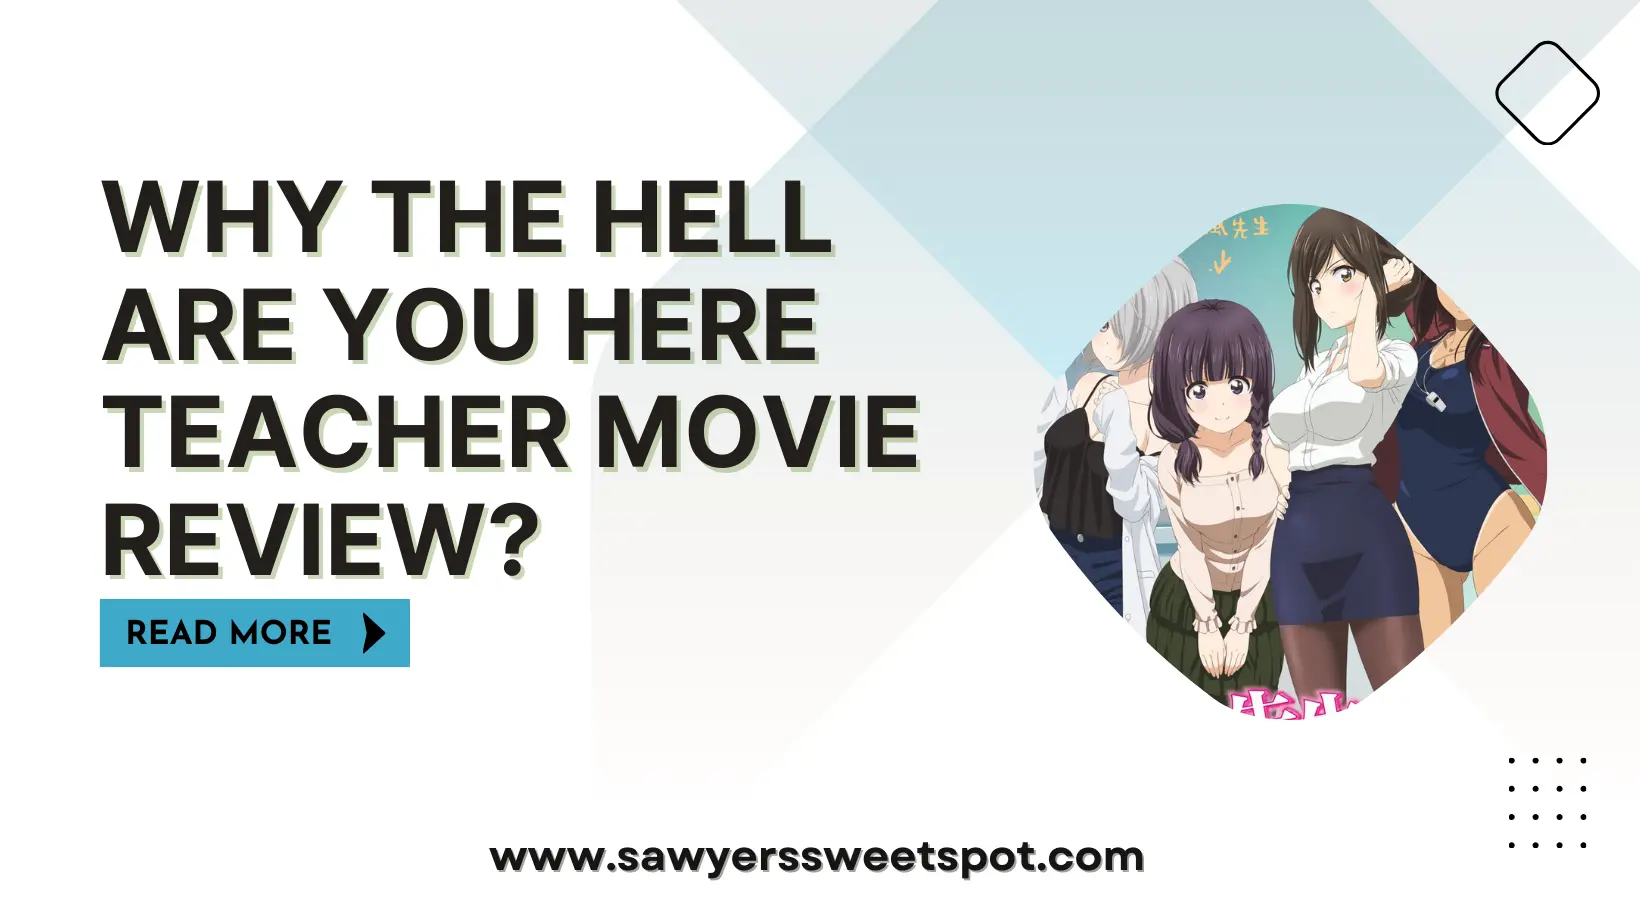 Why the Hell are you here Teacher Movie Review?